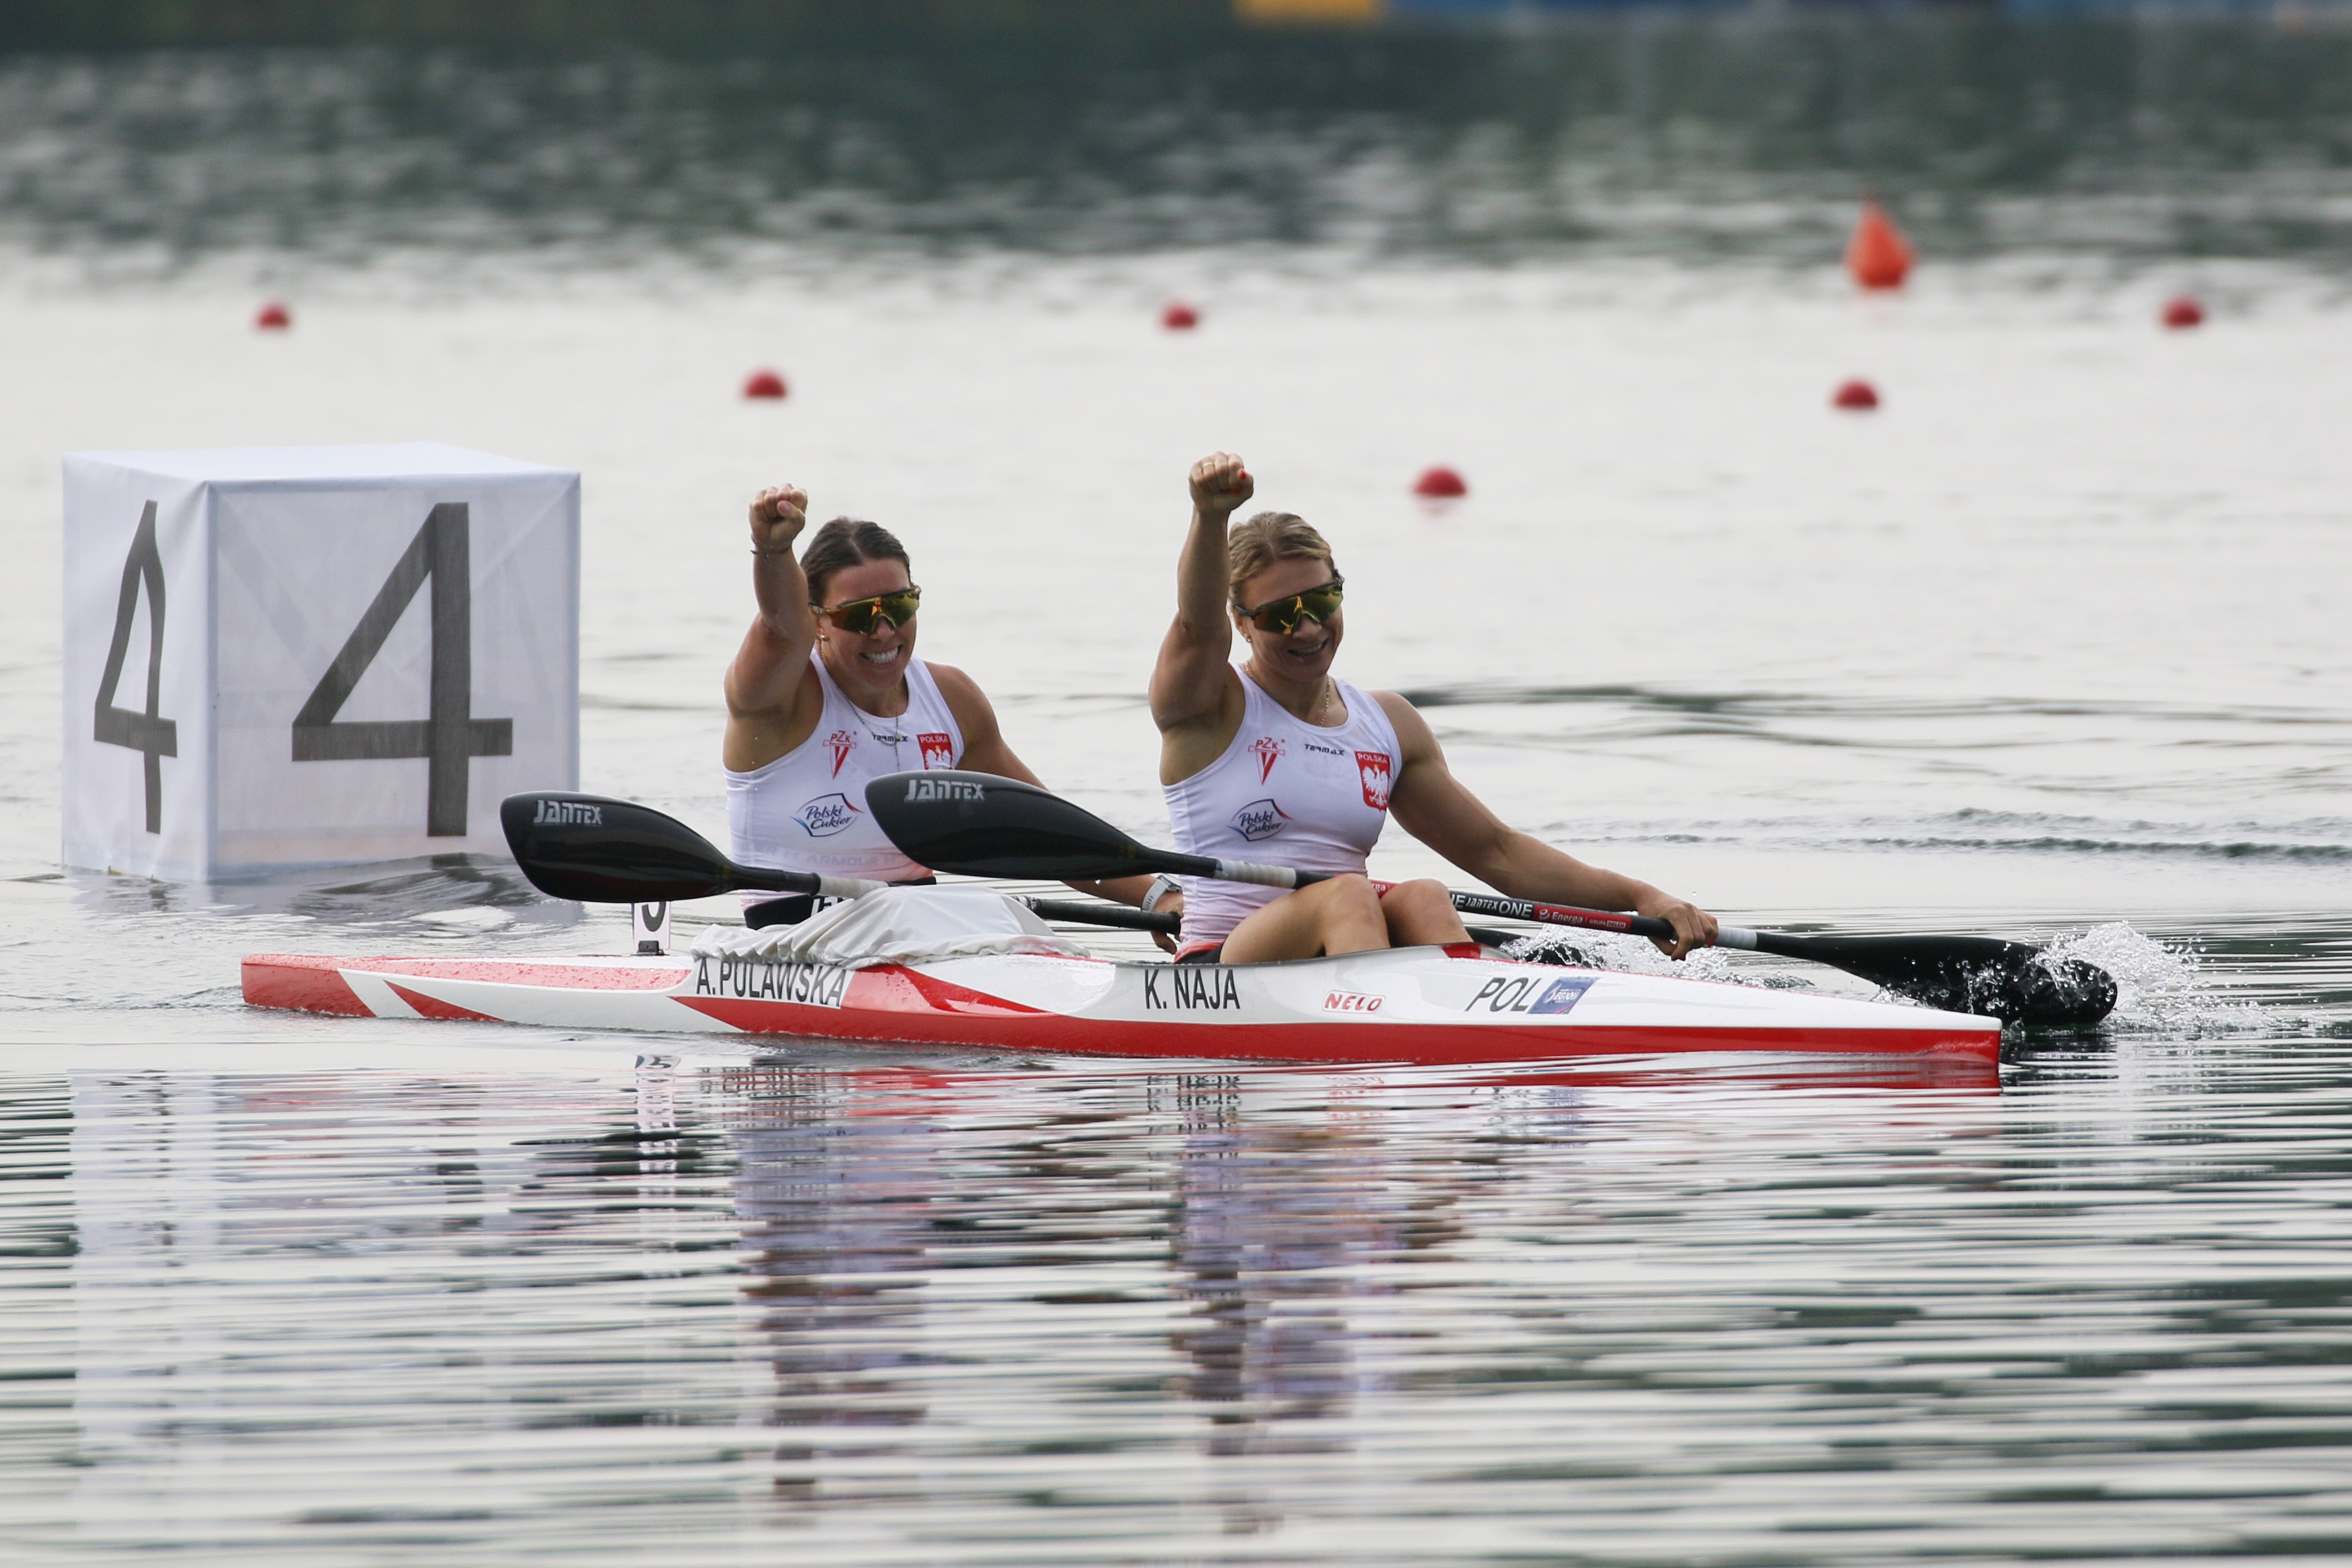 Poland and Jorgensen shine on day three of Canoe Sprint competition